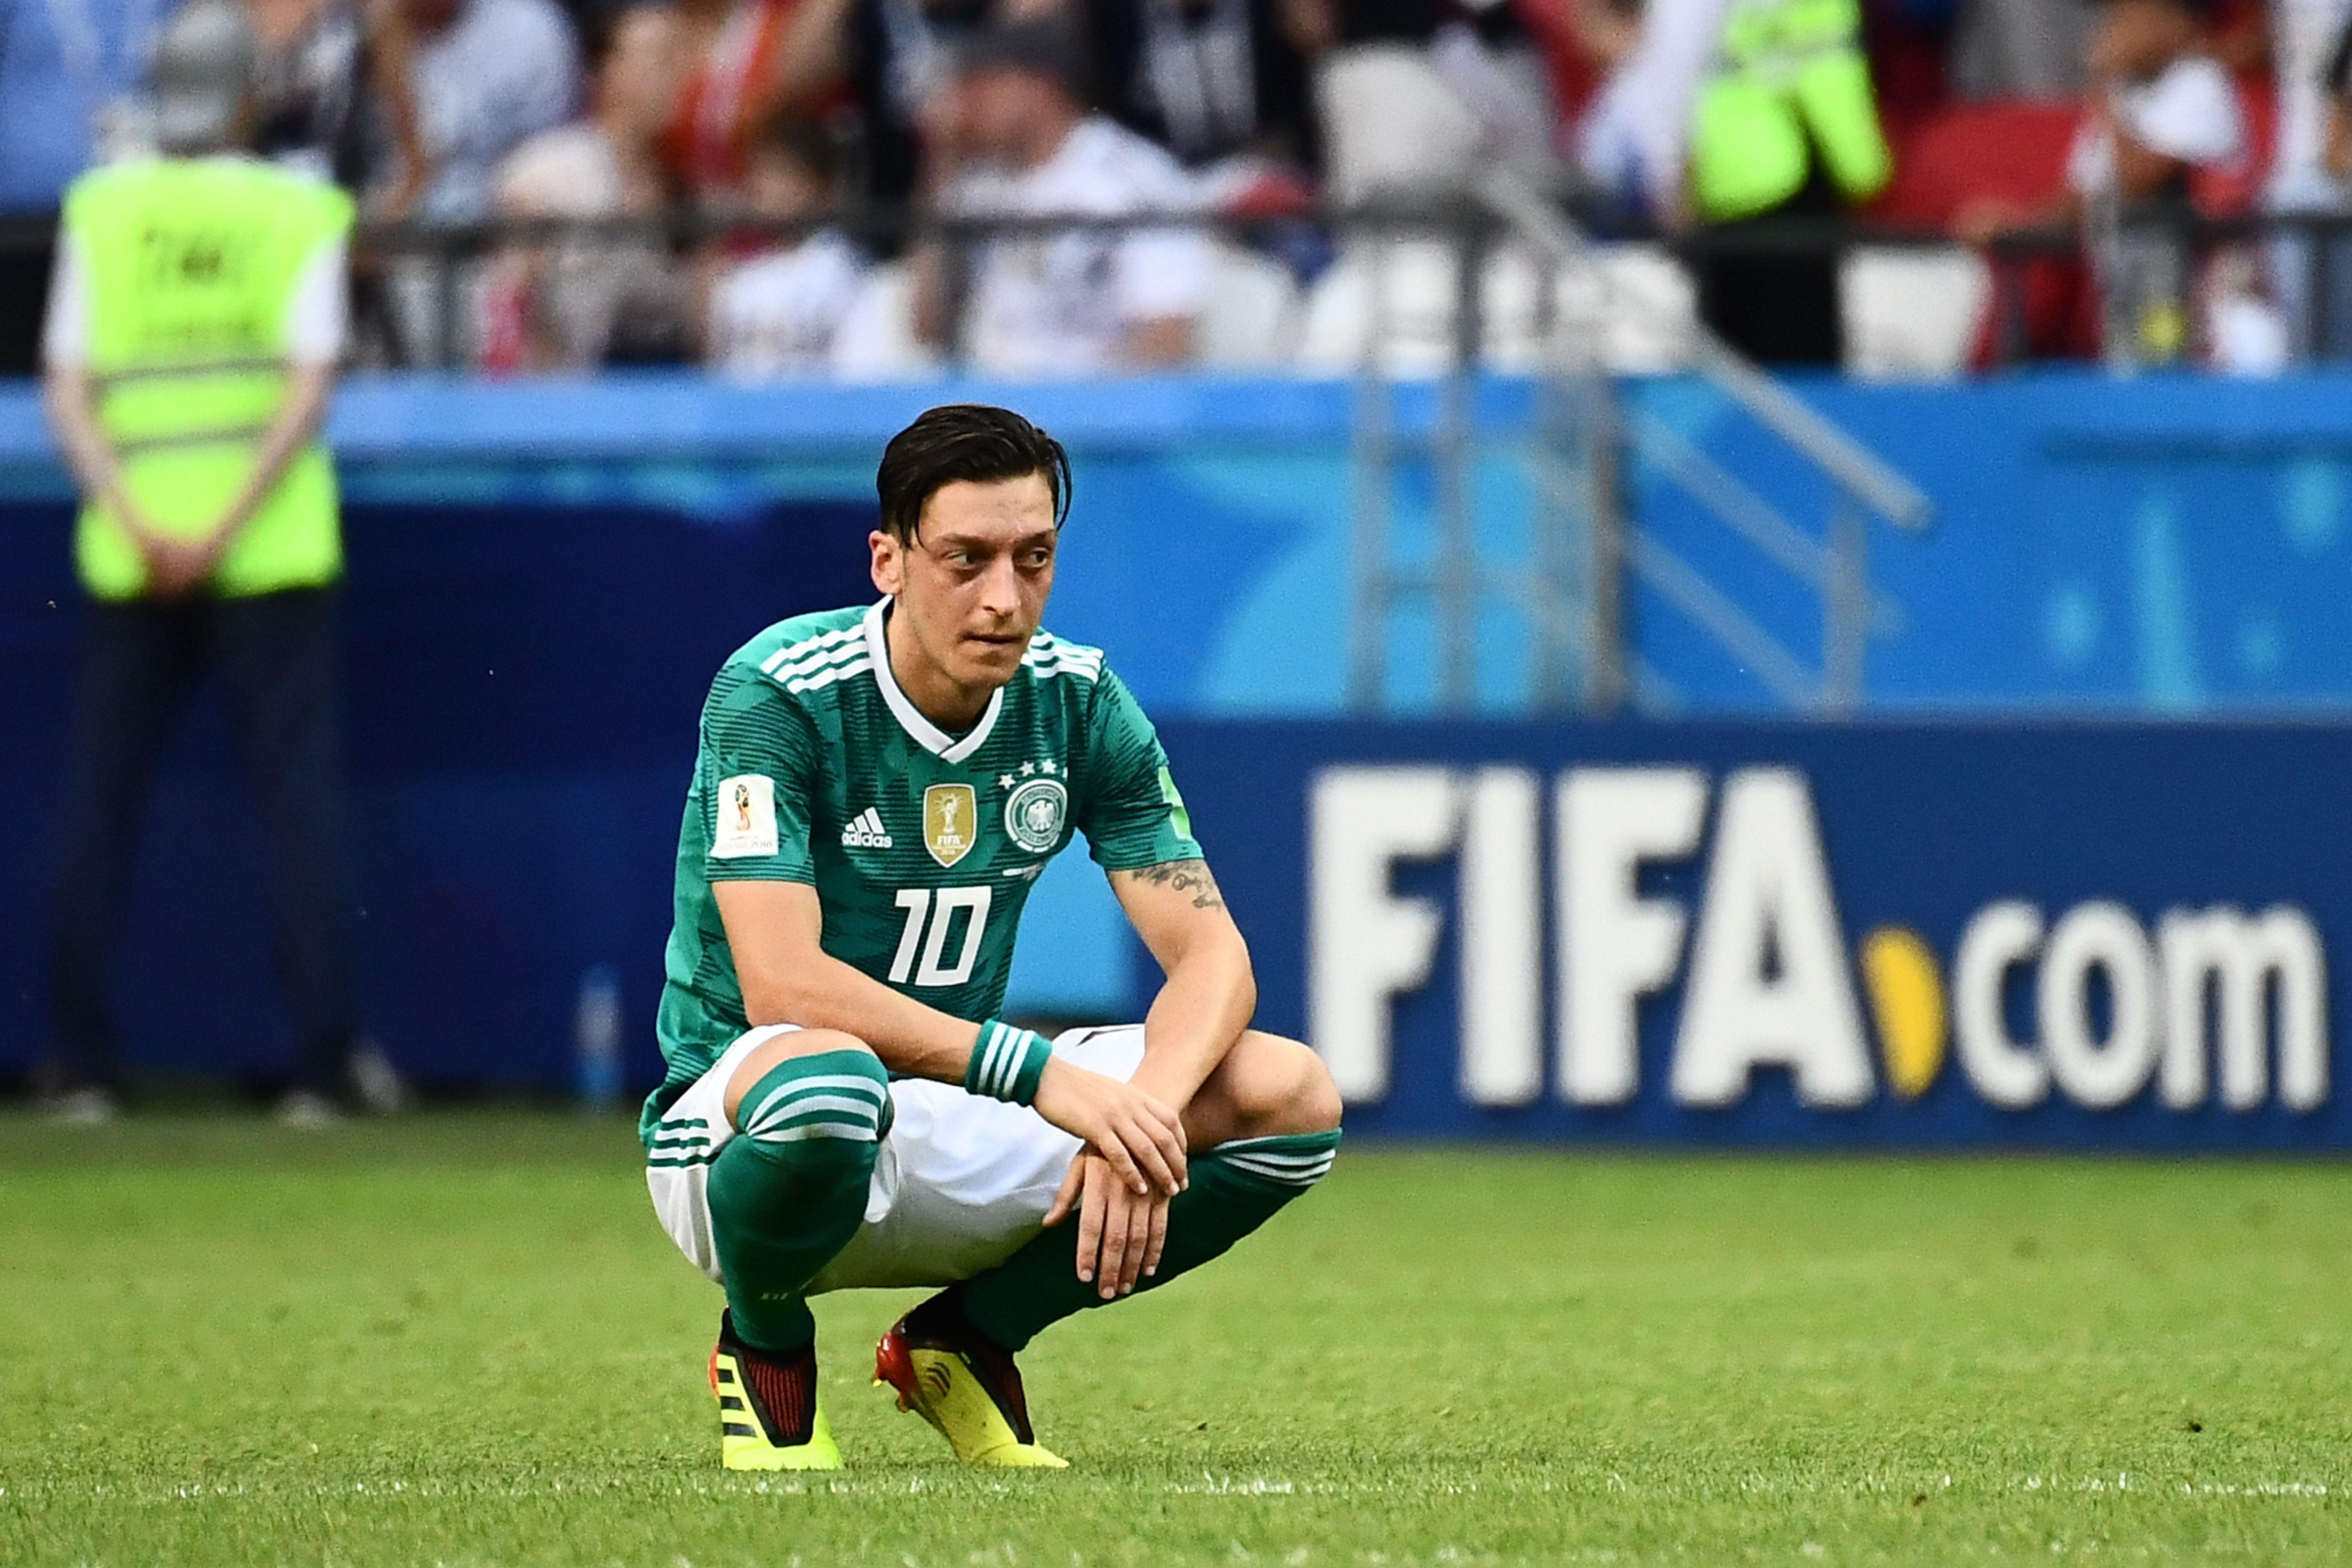 Germany's midfielder Mesut Ozil reacts after South Korea's forward Son Heung-min (unseen) scored the second goal during the Russia 2018 World Cup Group F football match between South Korea and Germany at the Kazan Arena in Kazan on June 27, 2018. (Photo by Jewel SAMAD / AFP) / RESTRICTED TO EDITORIAL USE - NO MOBILE PUSH ALERTS/DOWNLOADS        (Photo credit should read JEWEL SAMAD/AFP/Getty Images)